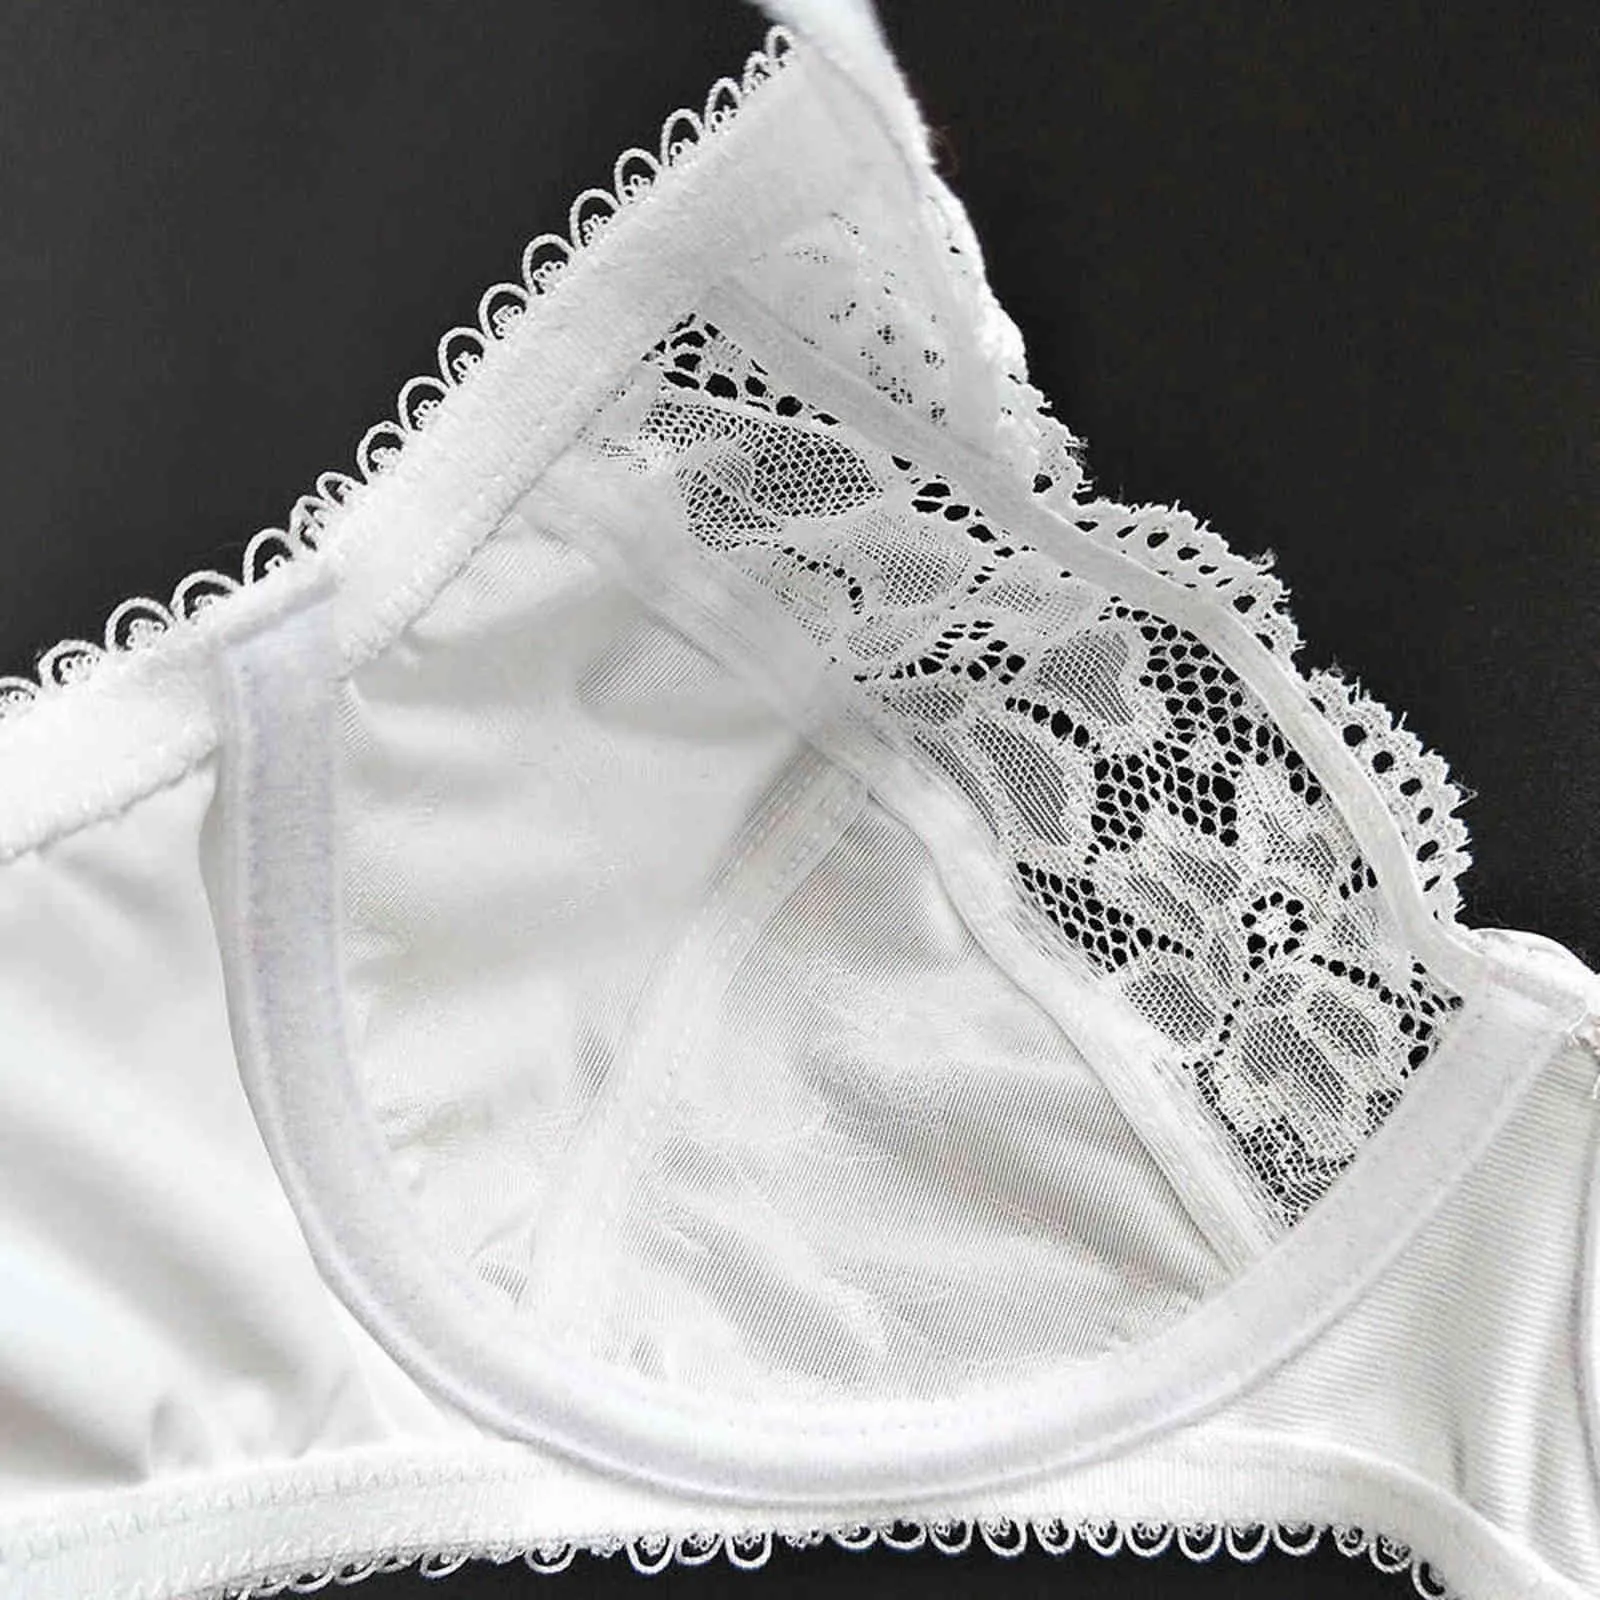 New Lace Perspective Bra Women Sexy Lingerie Underwire Embroidery Floral  Bralette Bras B C D E F G 75 80 85 90 95 100 105 110